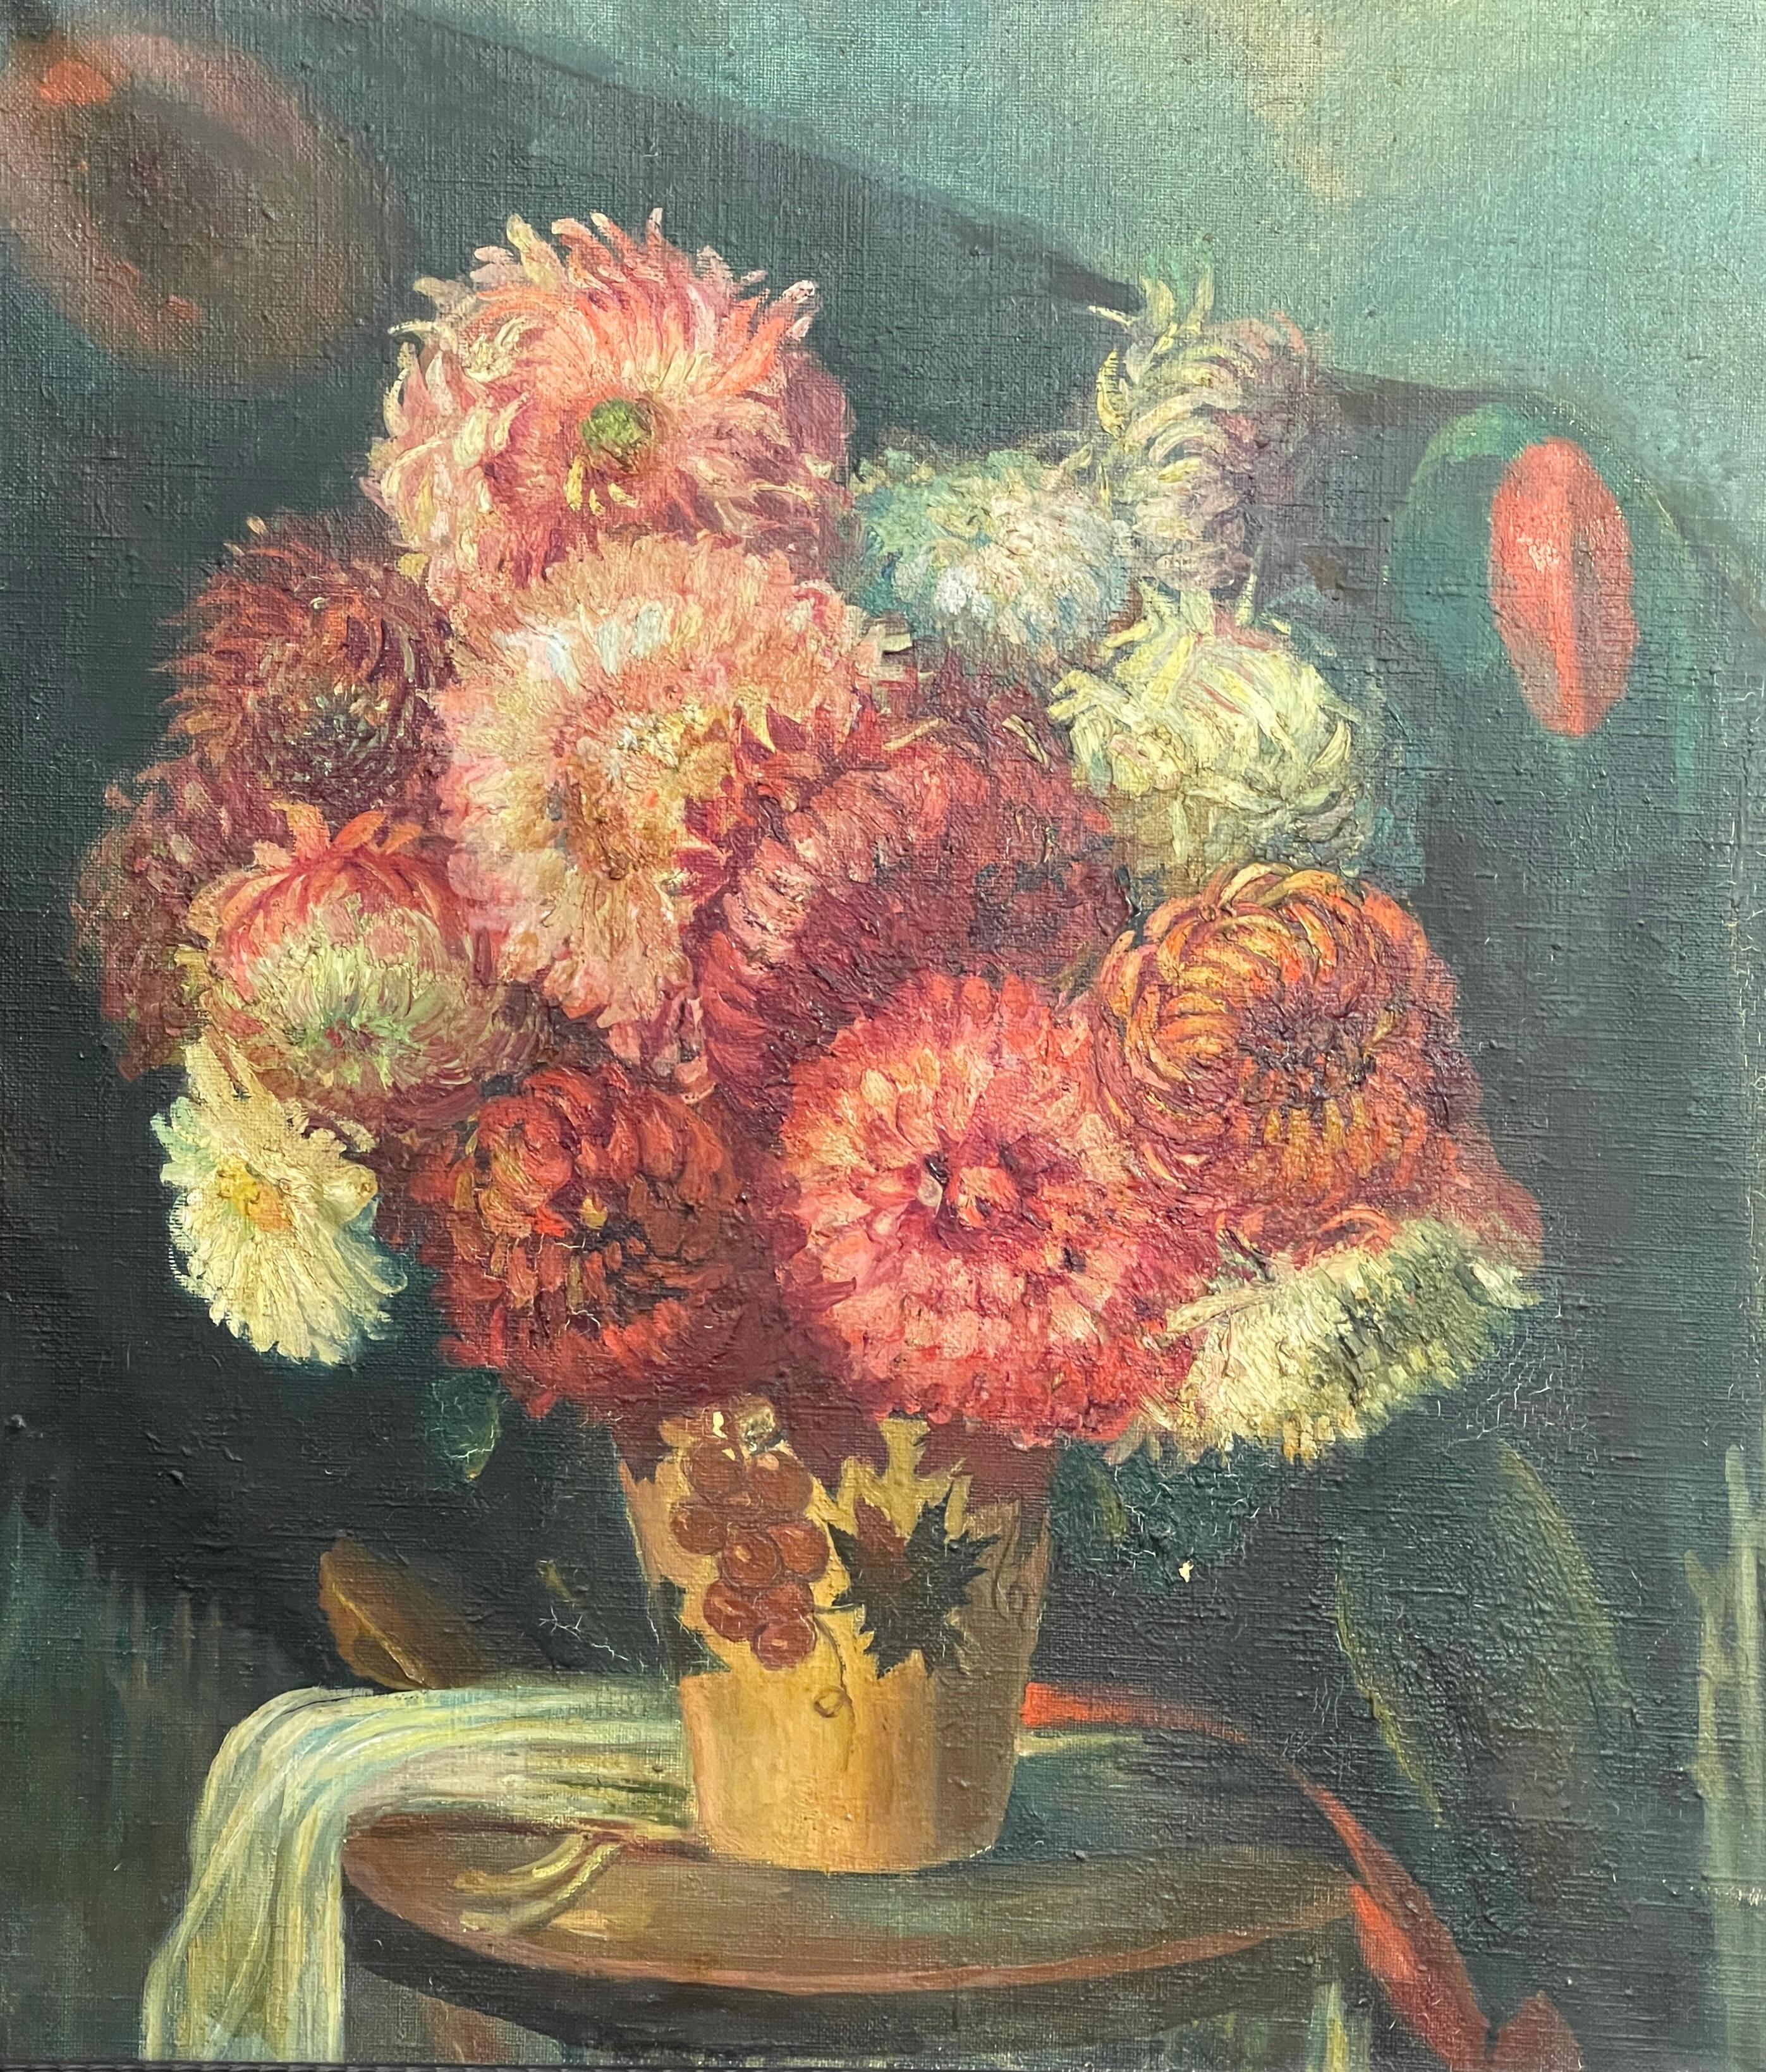 Oil painting on canvas, late 19th century, flowers
Oil painting on canvas, depicting a floral composition.
Contemporary frame, from the late 1800s.
Good condition as from picture
Dimensions (excluding frame): 60x70 cm